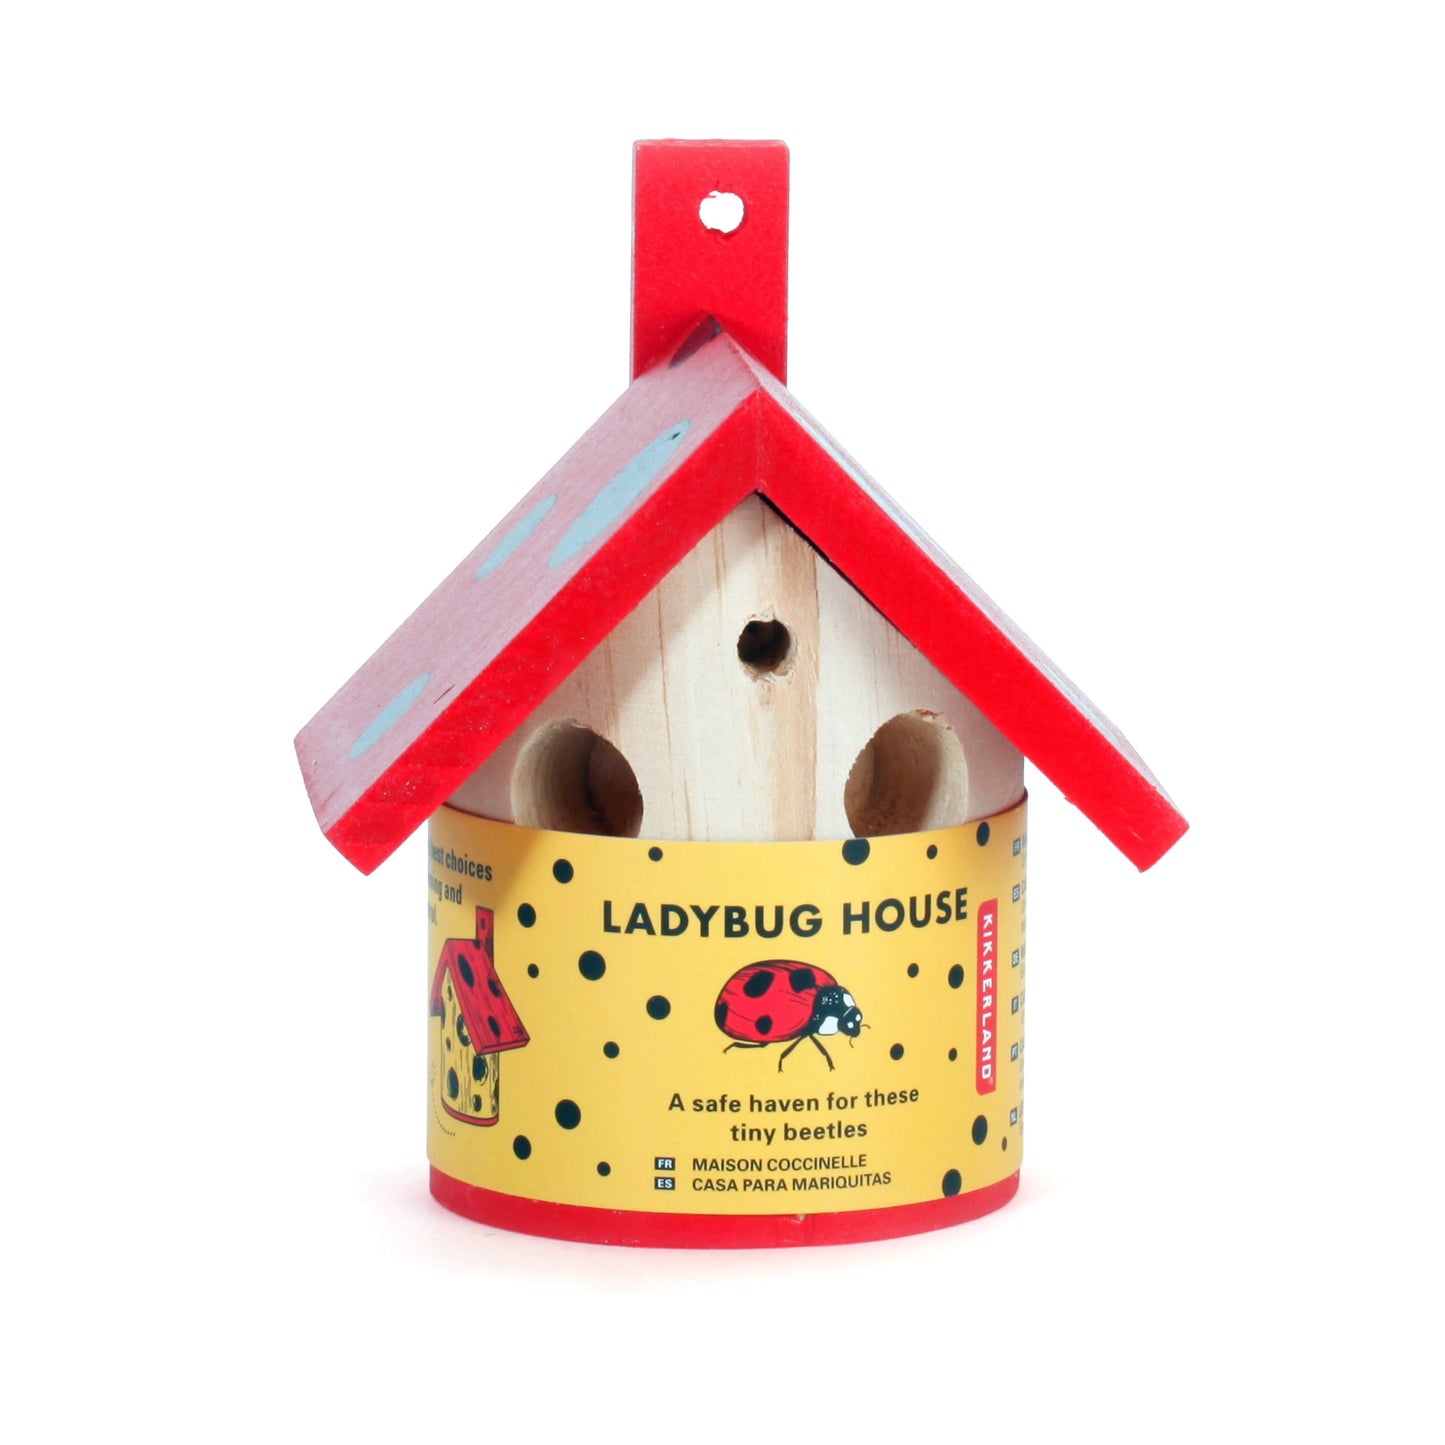 Pinewood ladybird house with a red spotty roof and yellow packaging.